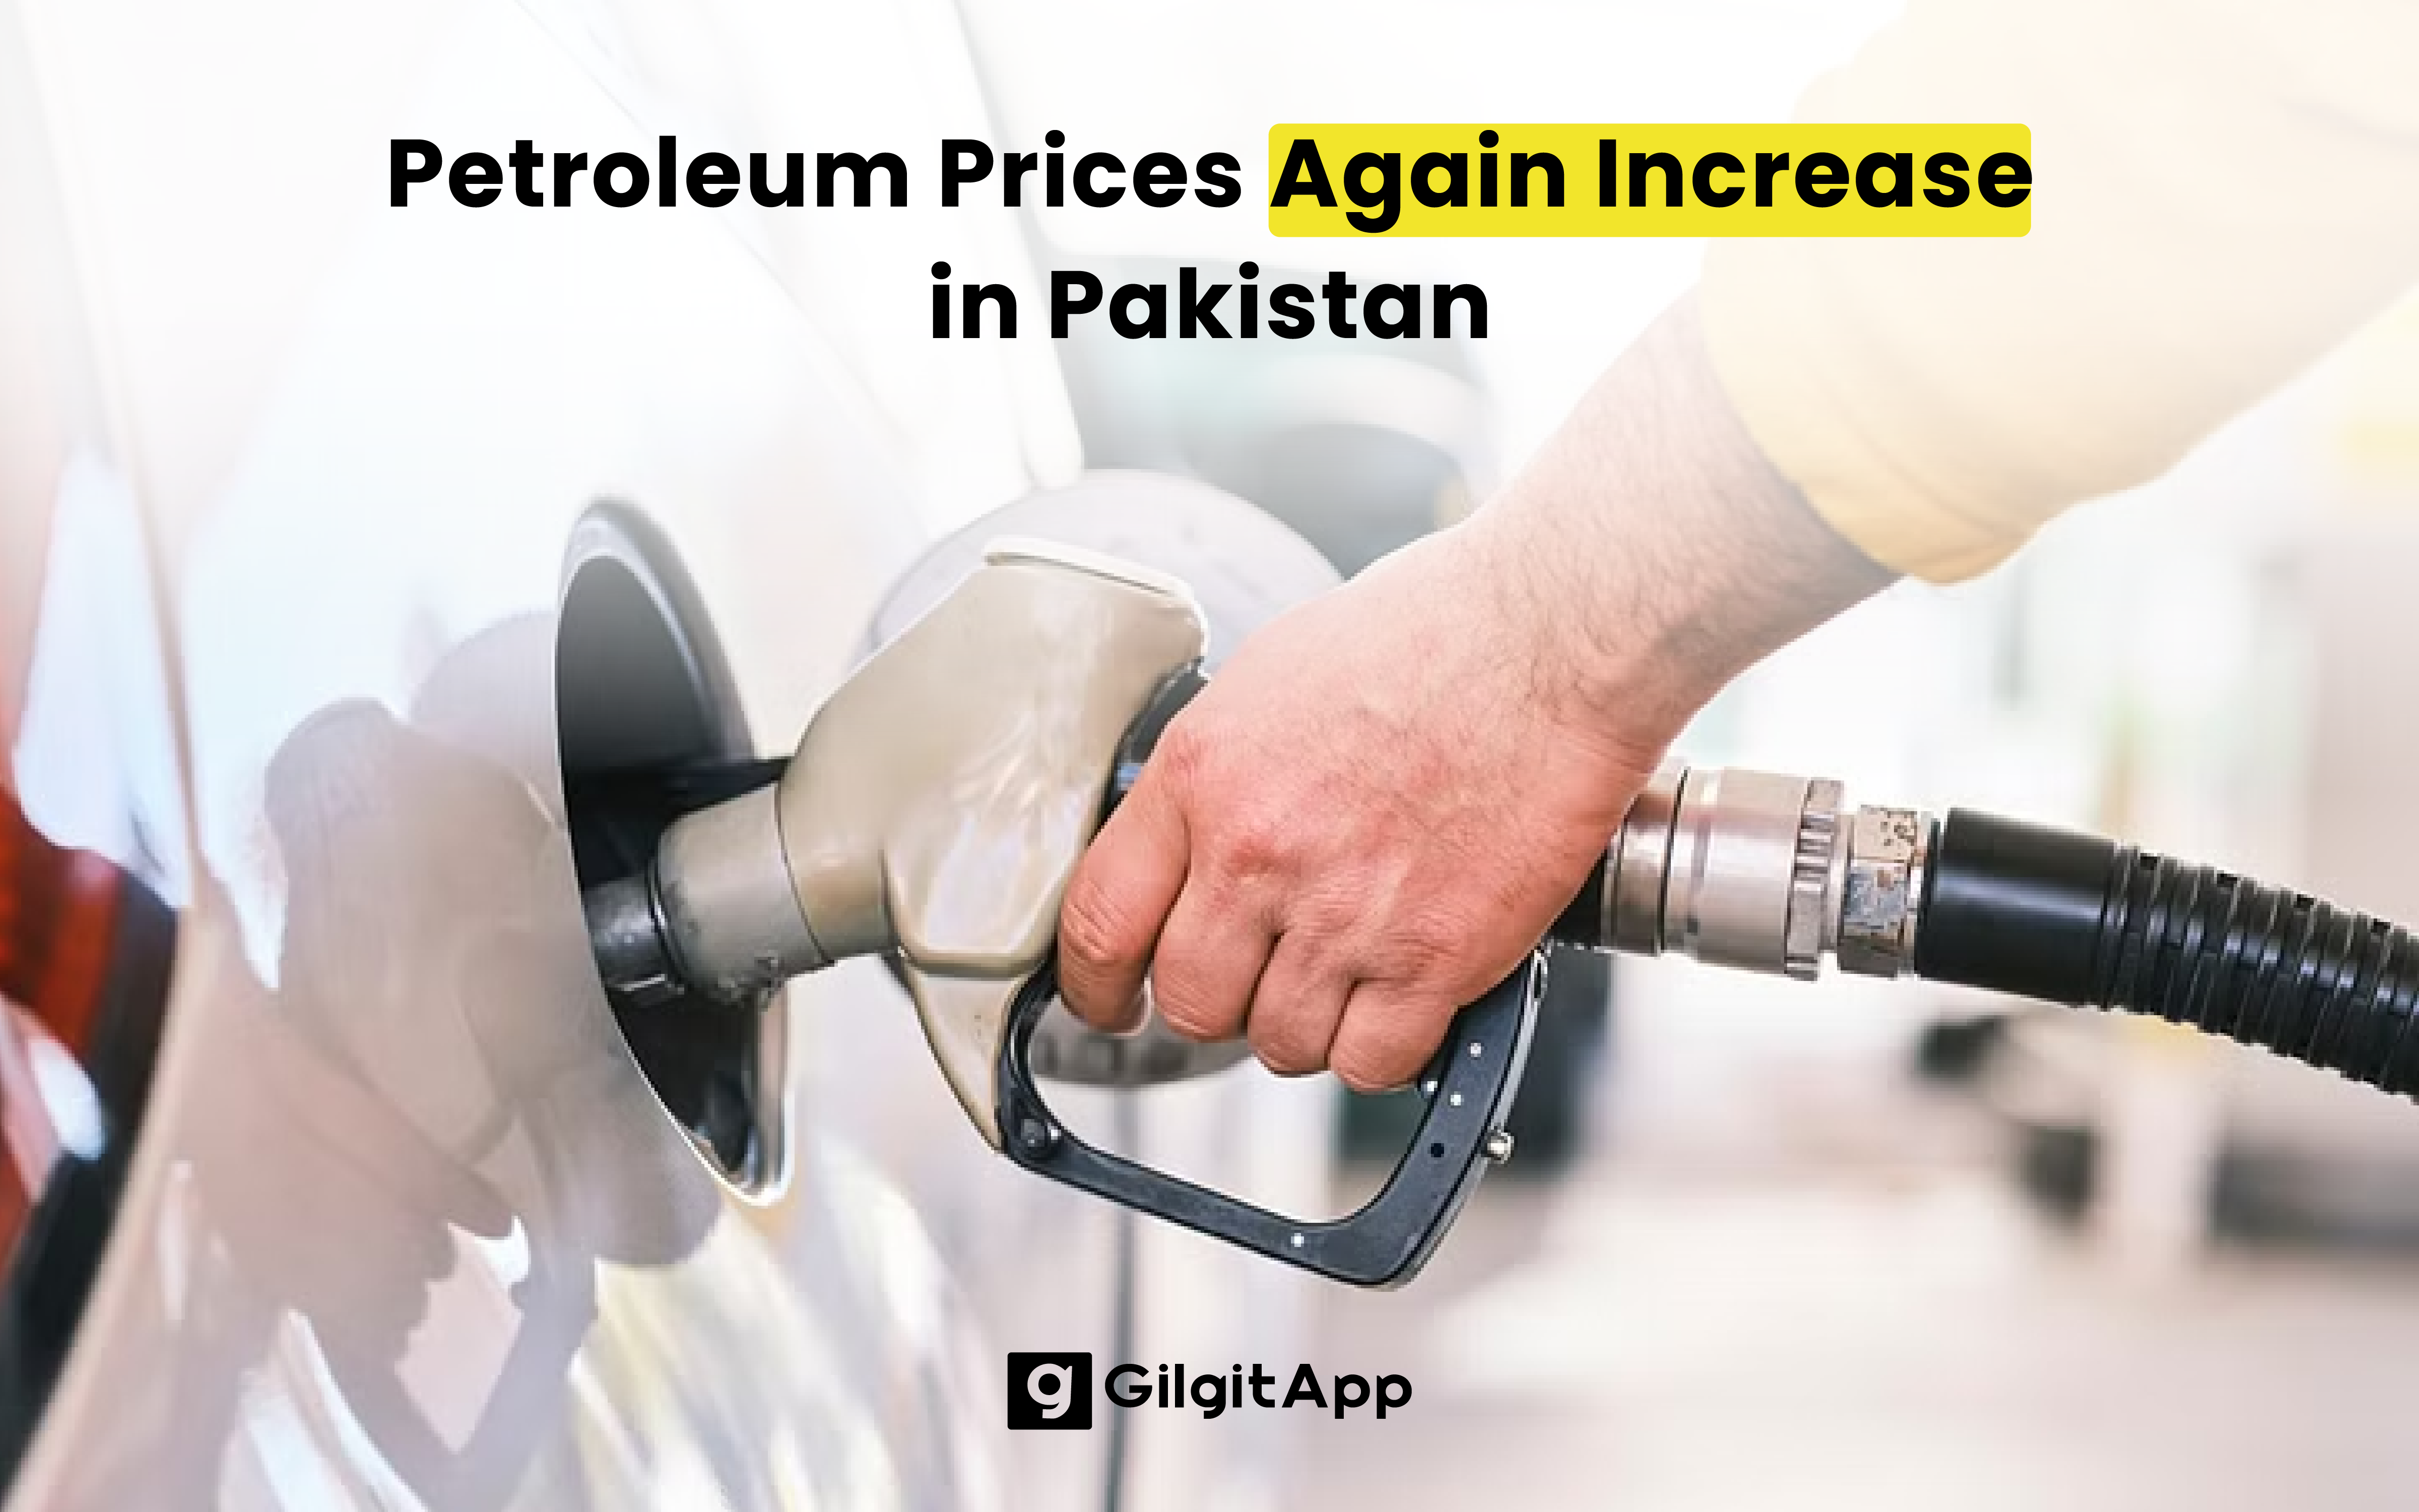 The Government Announced an Increase in Petroleum Prices in Pakistan